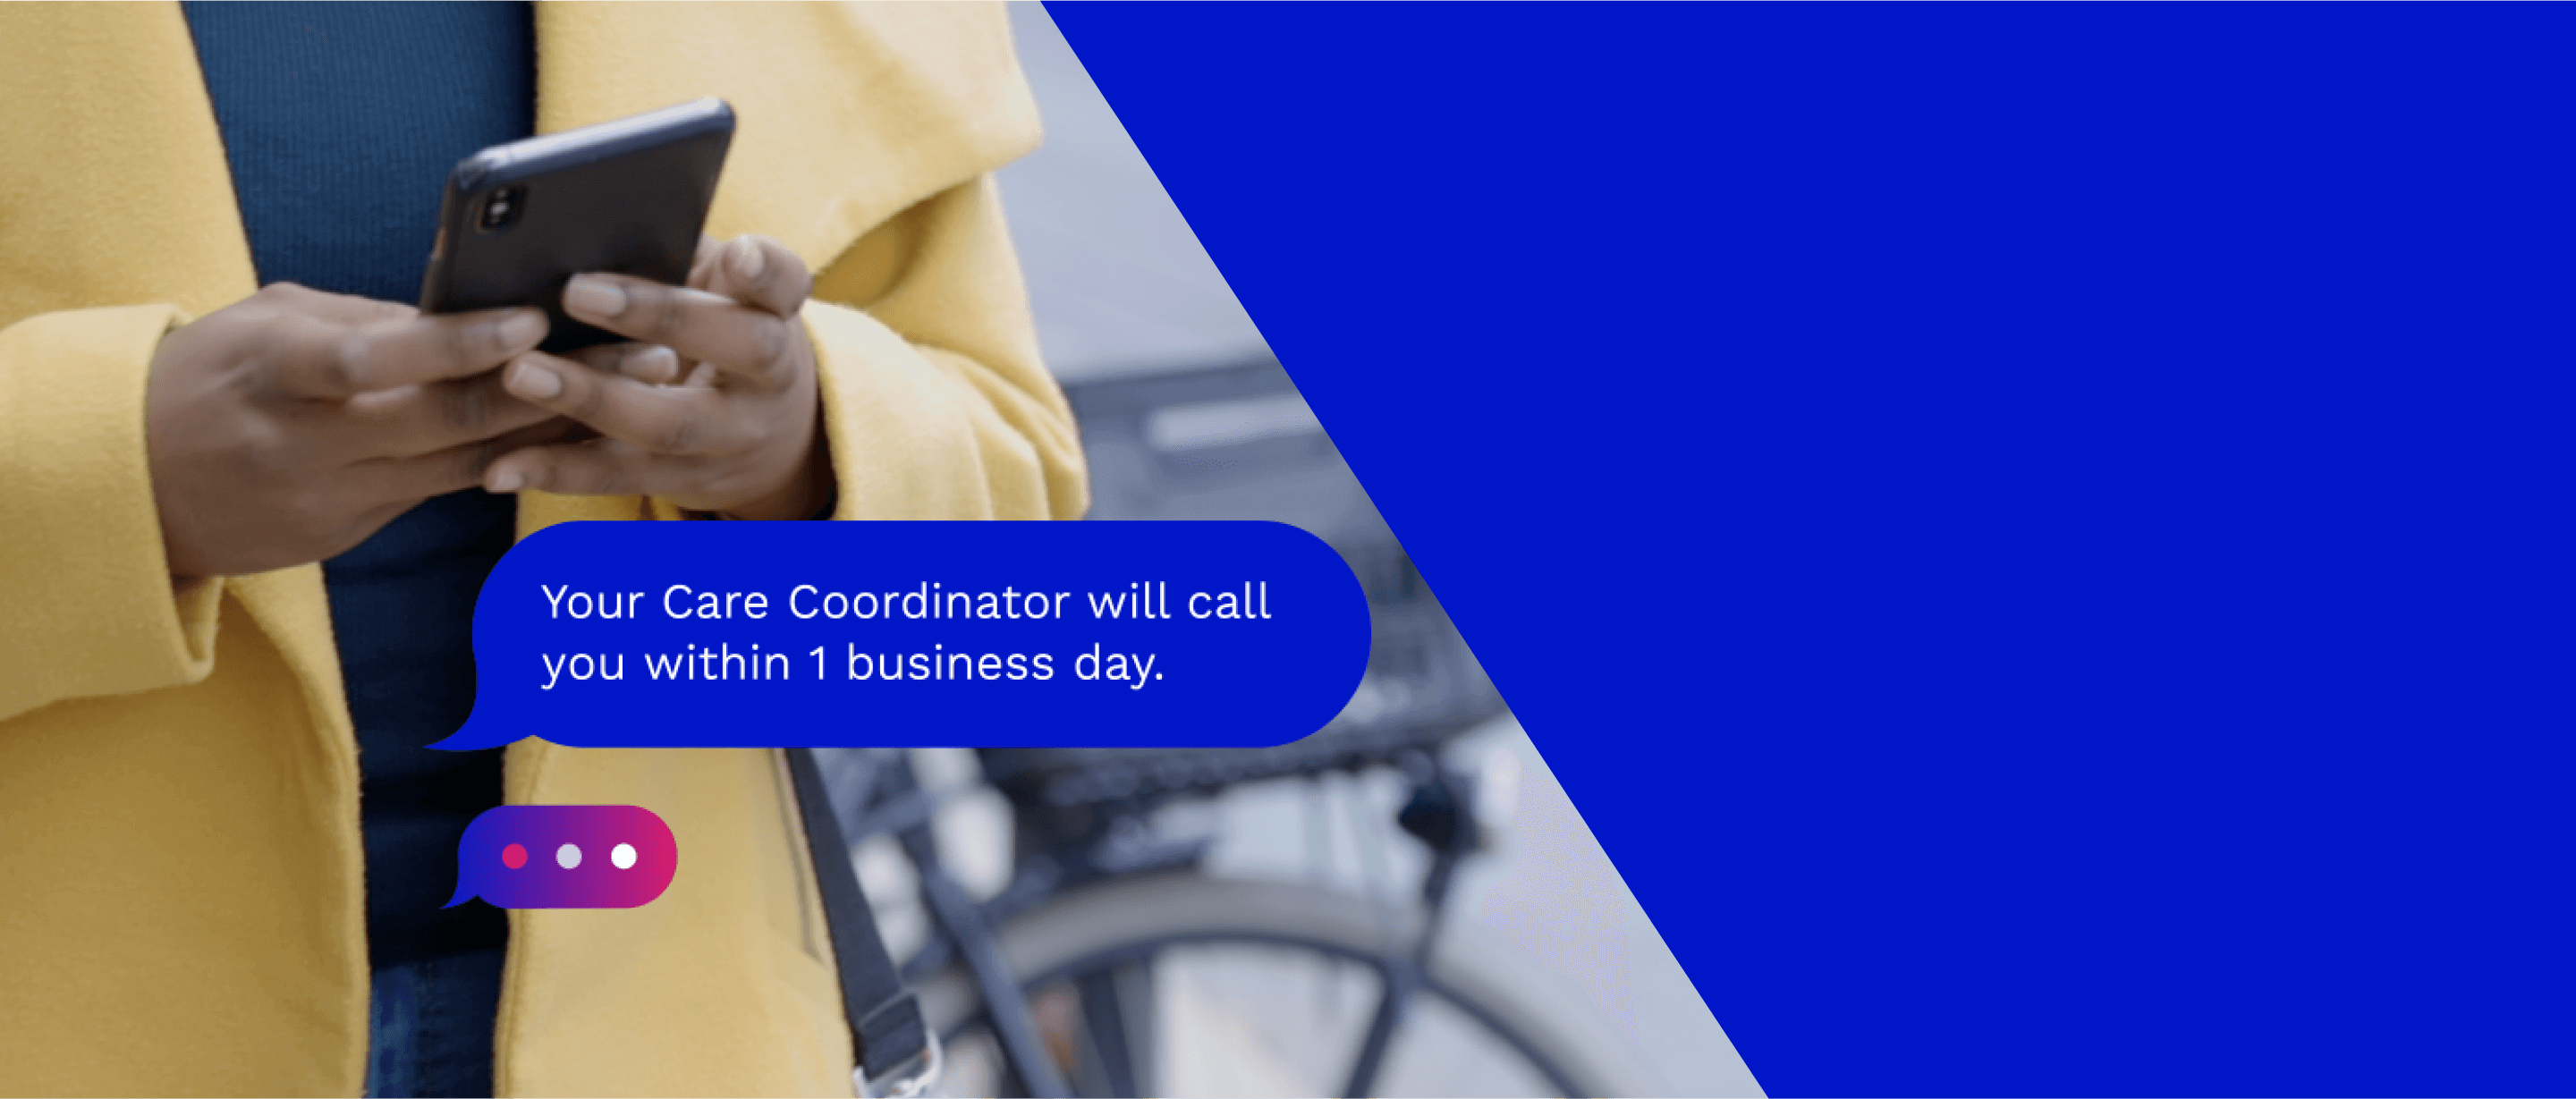 A woman's hands holding her cellphone with text bubble that says Your Care Coordinator will call you within 1 business day.